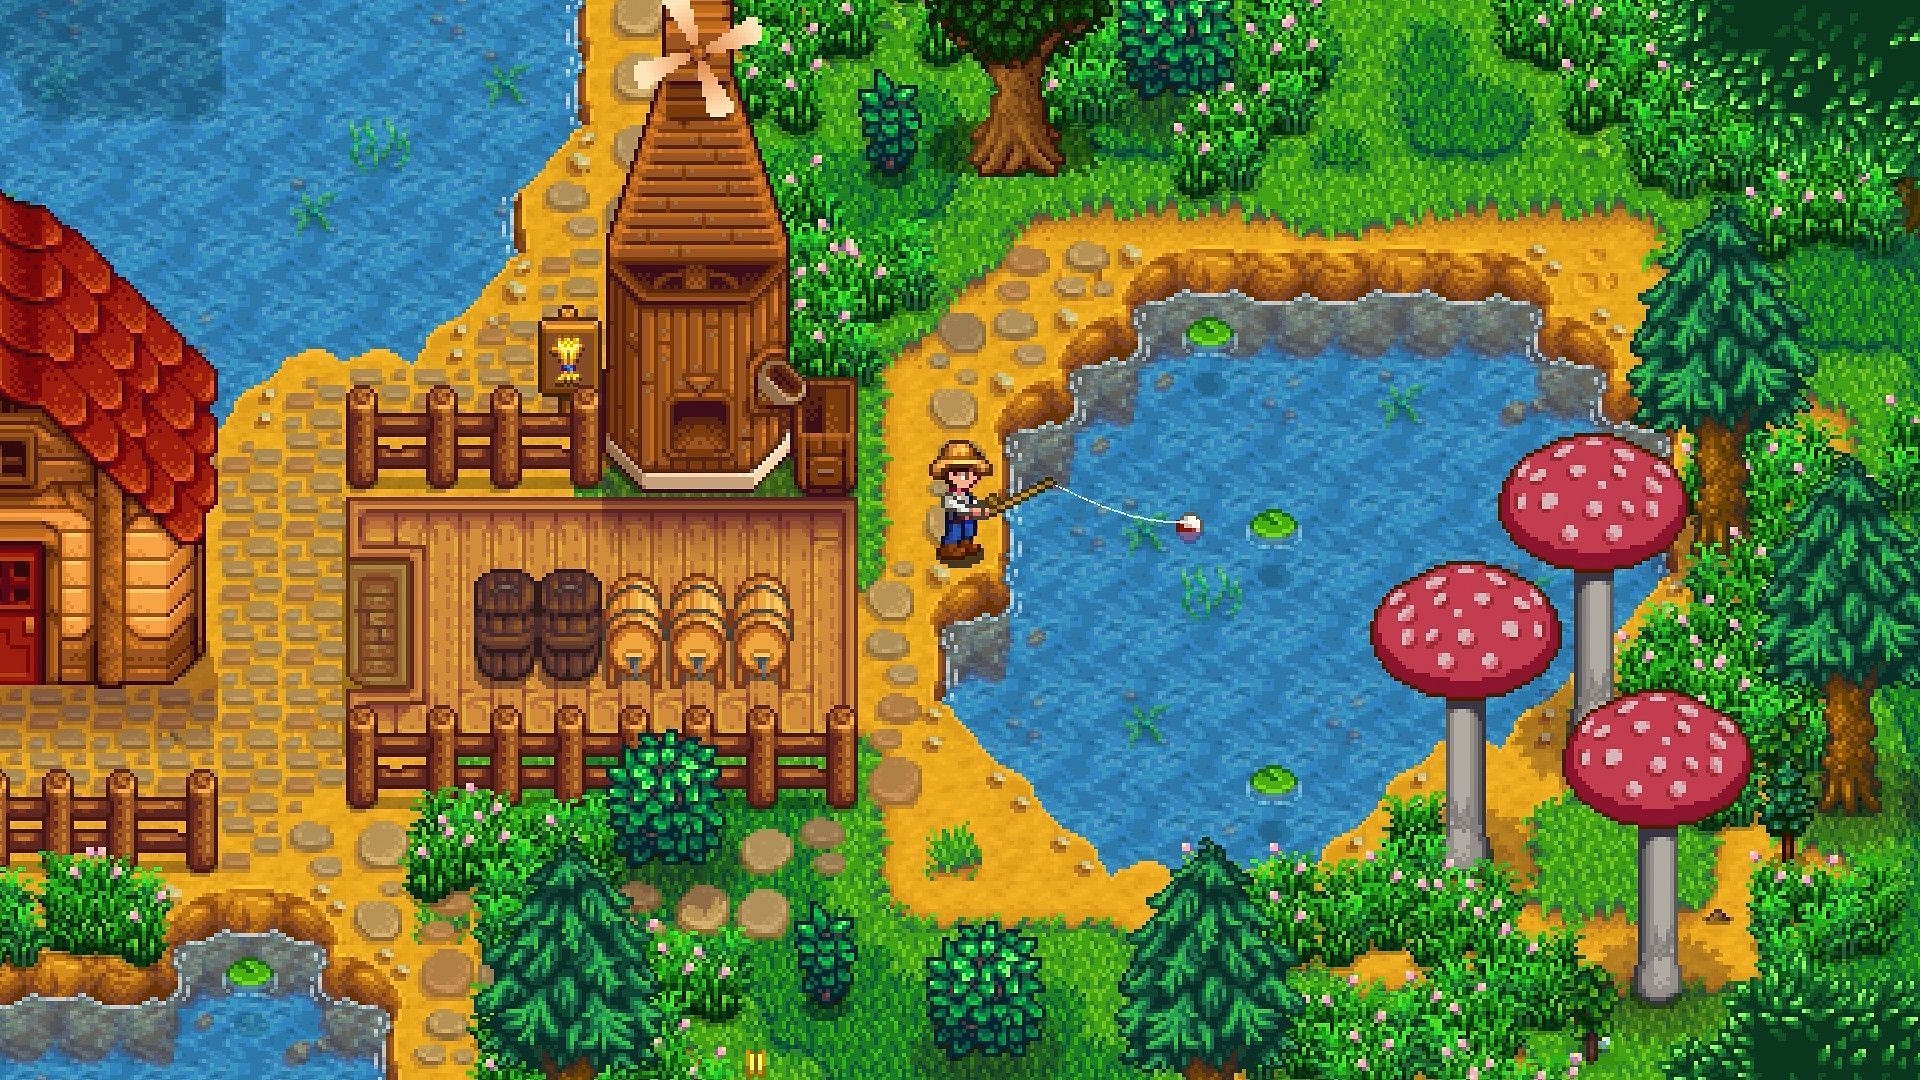 You can get Albacore by fishing on the beach at Pelican Town (Image via ConcernedApe)